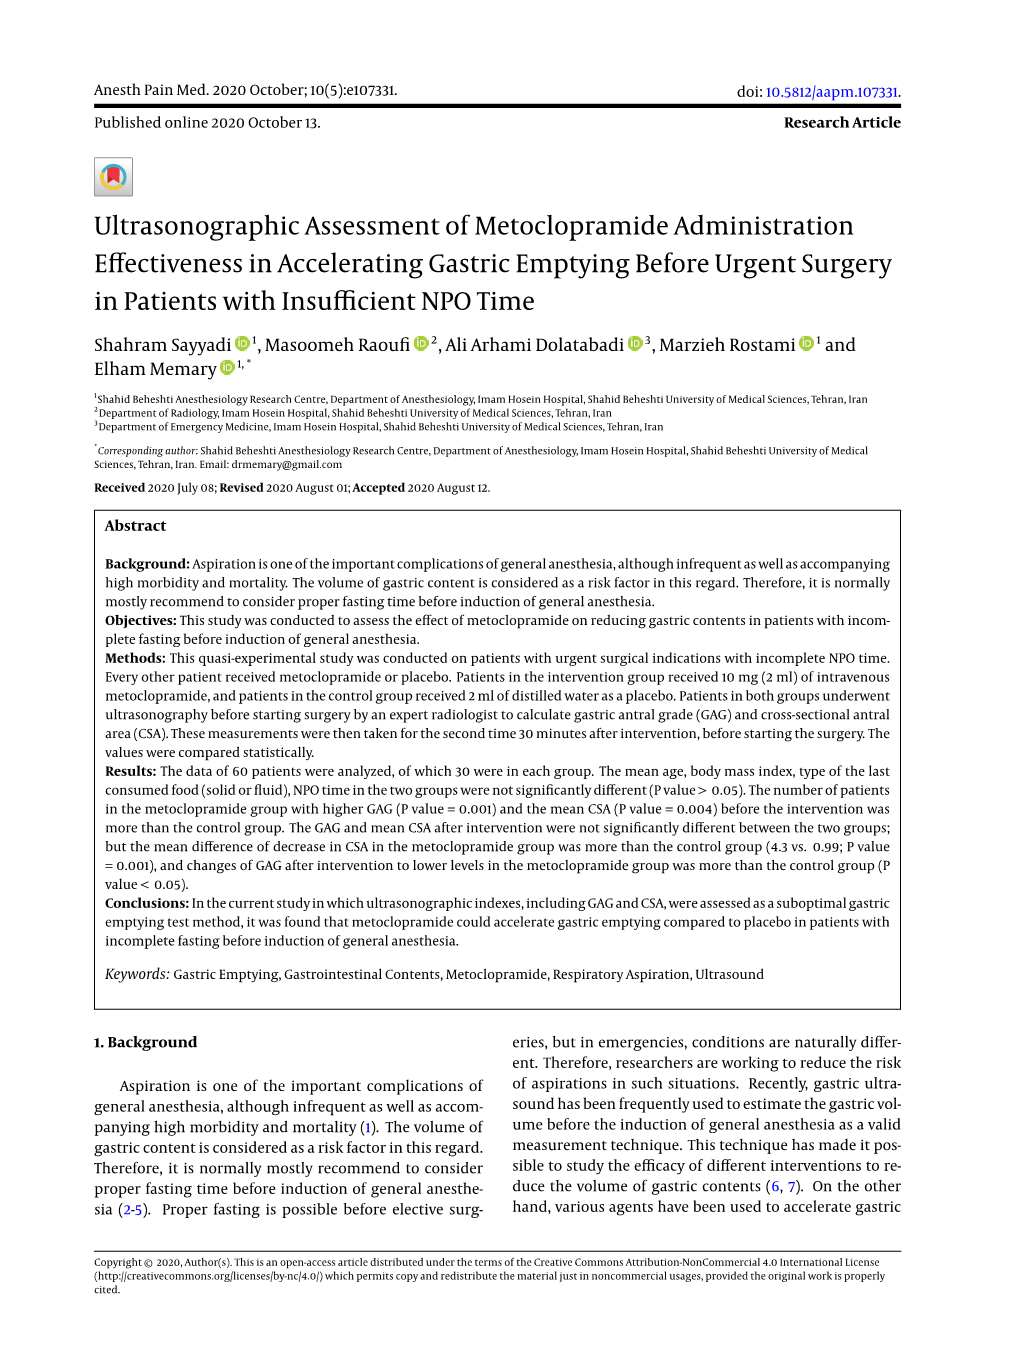 Ultrasonographic Assessment of Metoclopramide Administration Eﬀectiveness in Accelerating Gastric Emptying Before Urgent Surgery in Patients with Insuﬃcient NPO Time